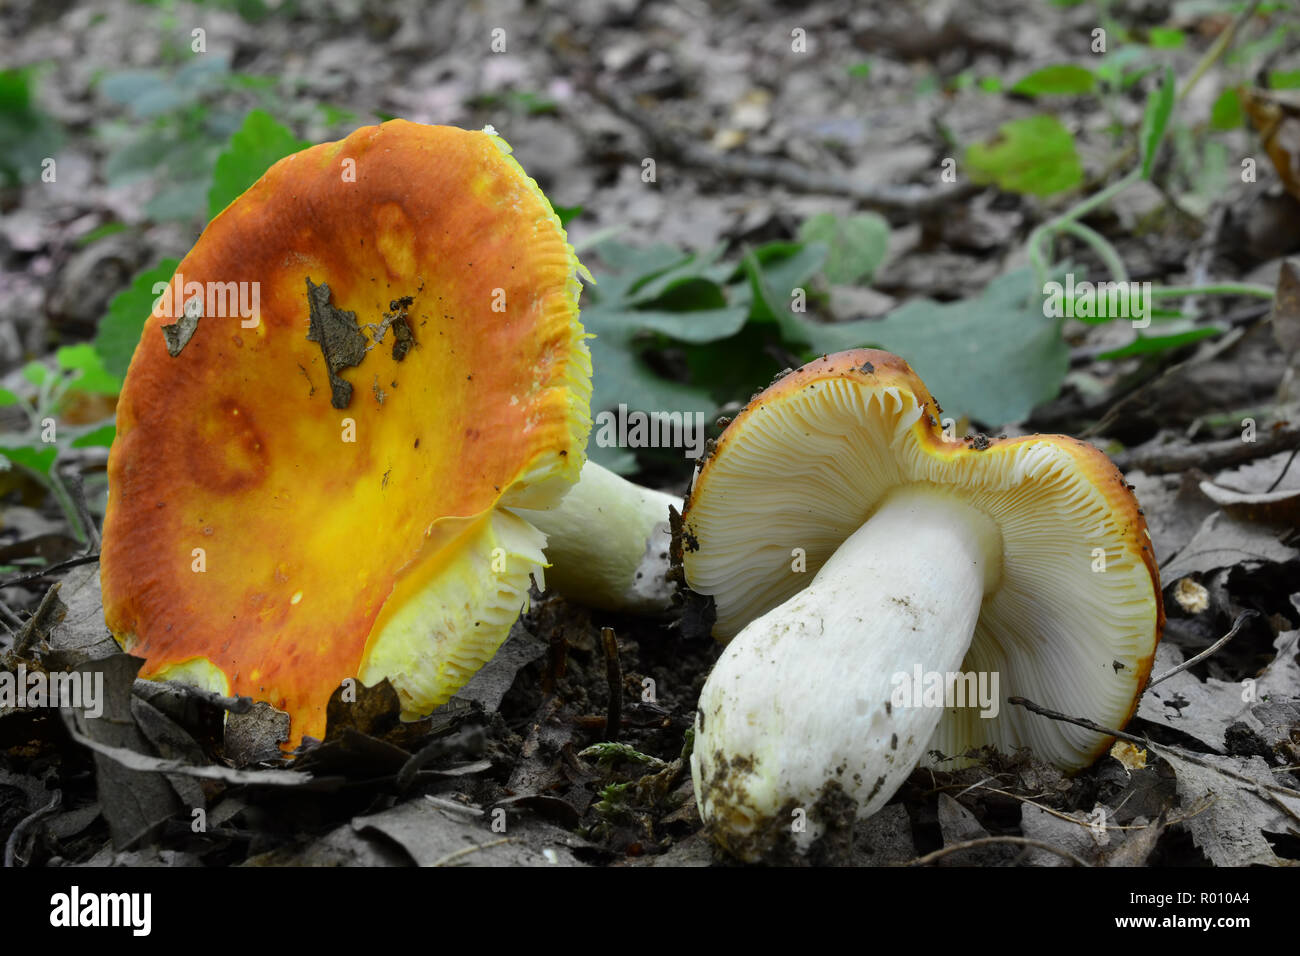 Two picked up specimen of Russula aurea, commonly known as the Gilded brittlegill,  an uncommon species of mushroom found in deciduous woodland in Eur Stock Photo